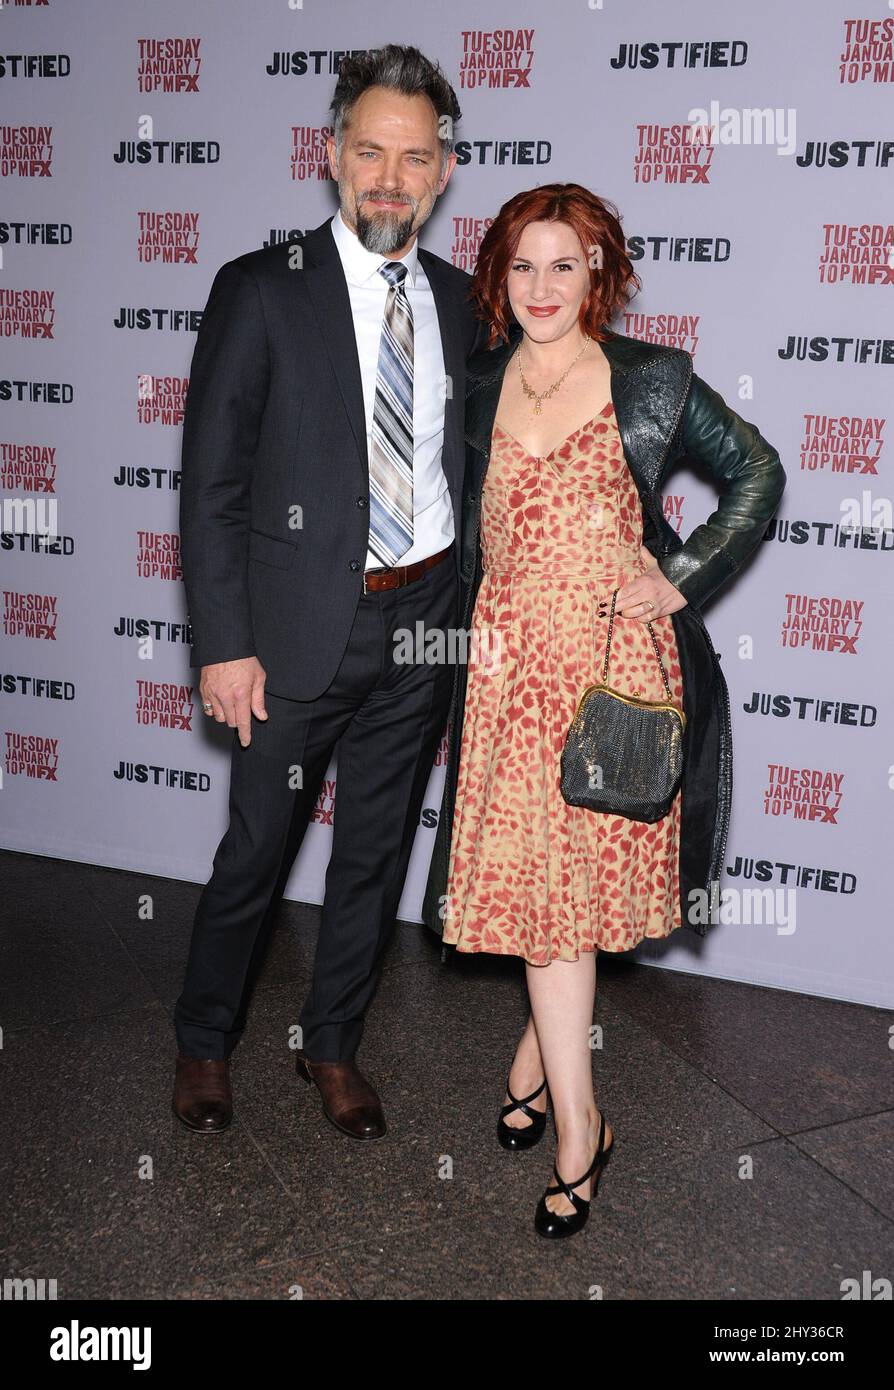 David Meunier & Faline England attends the 'Justified' Season 5 Premiere at the DGA, Los Angeles Stock Photo